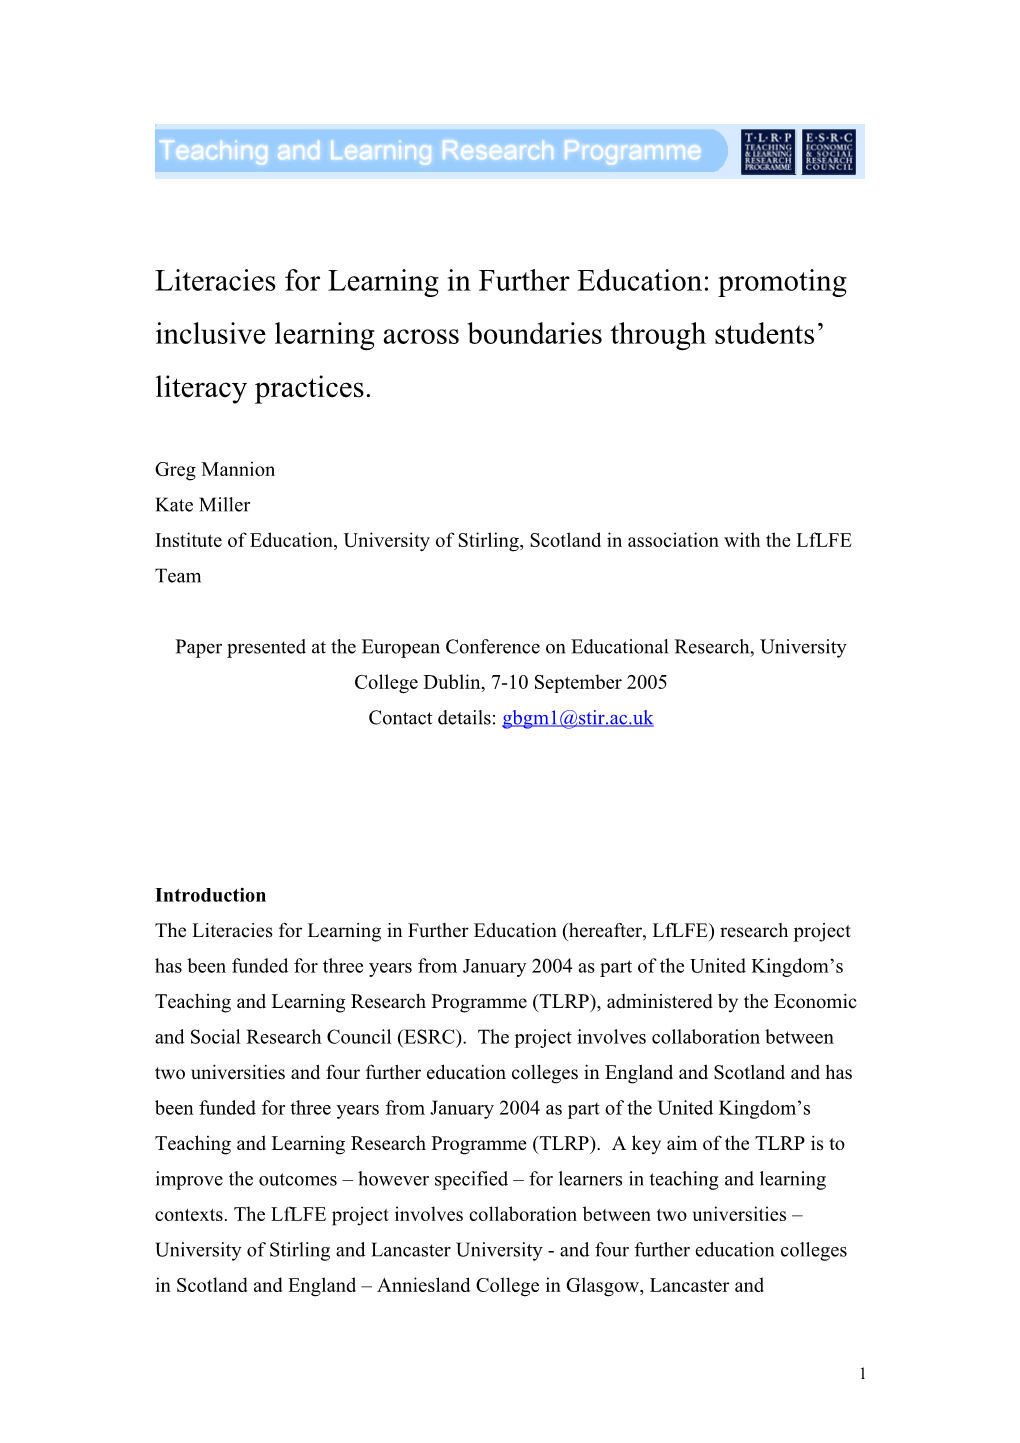 Institute of Education, University of Stirling, Scotland in Association with the Lflfe Team